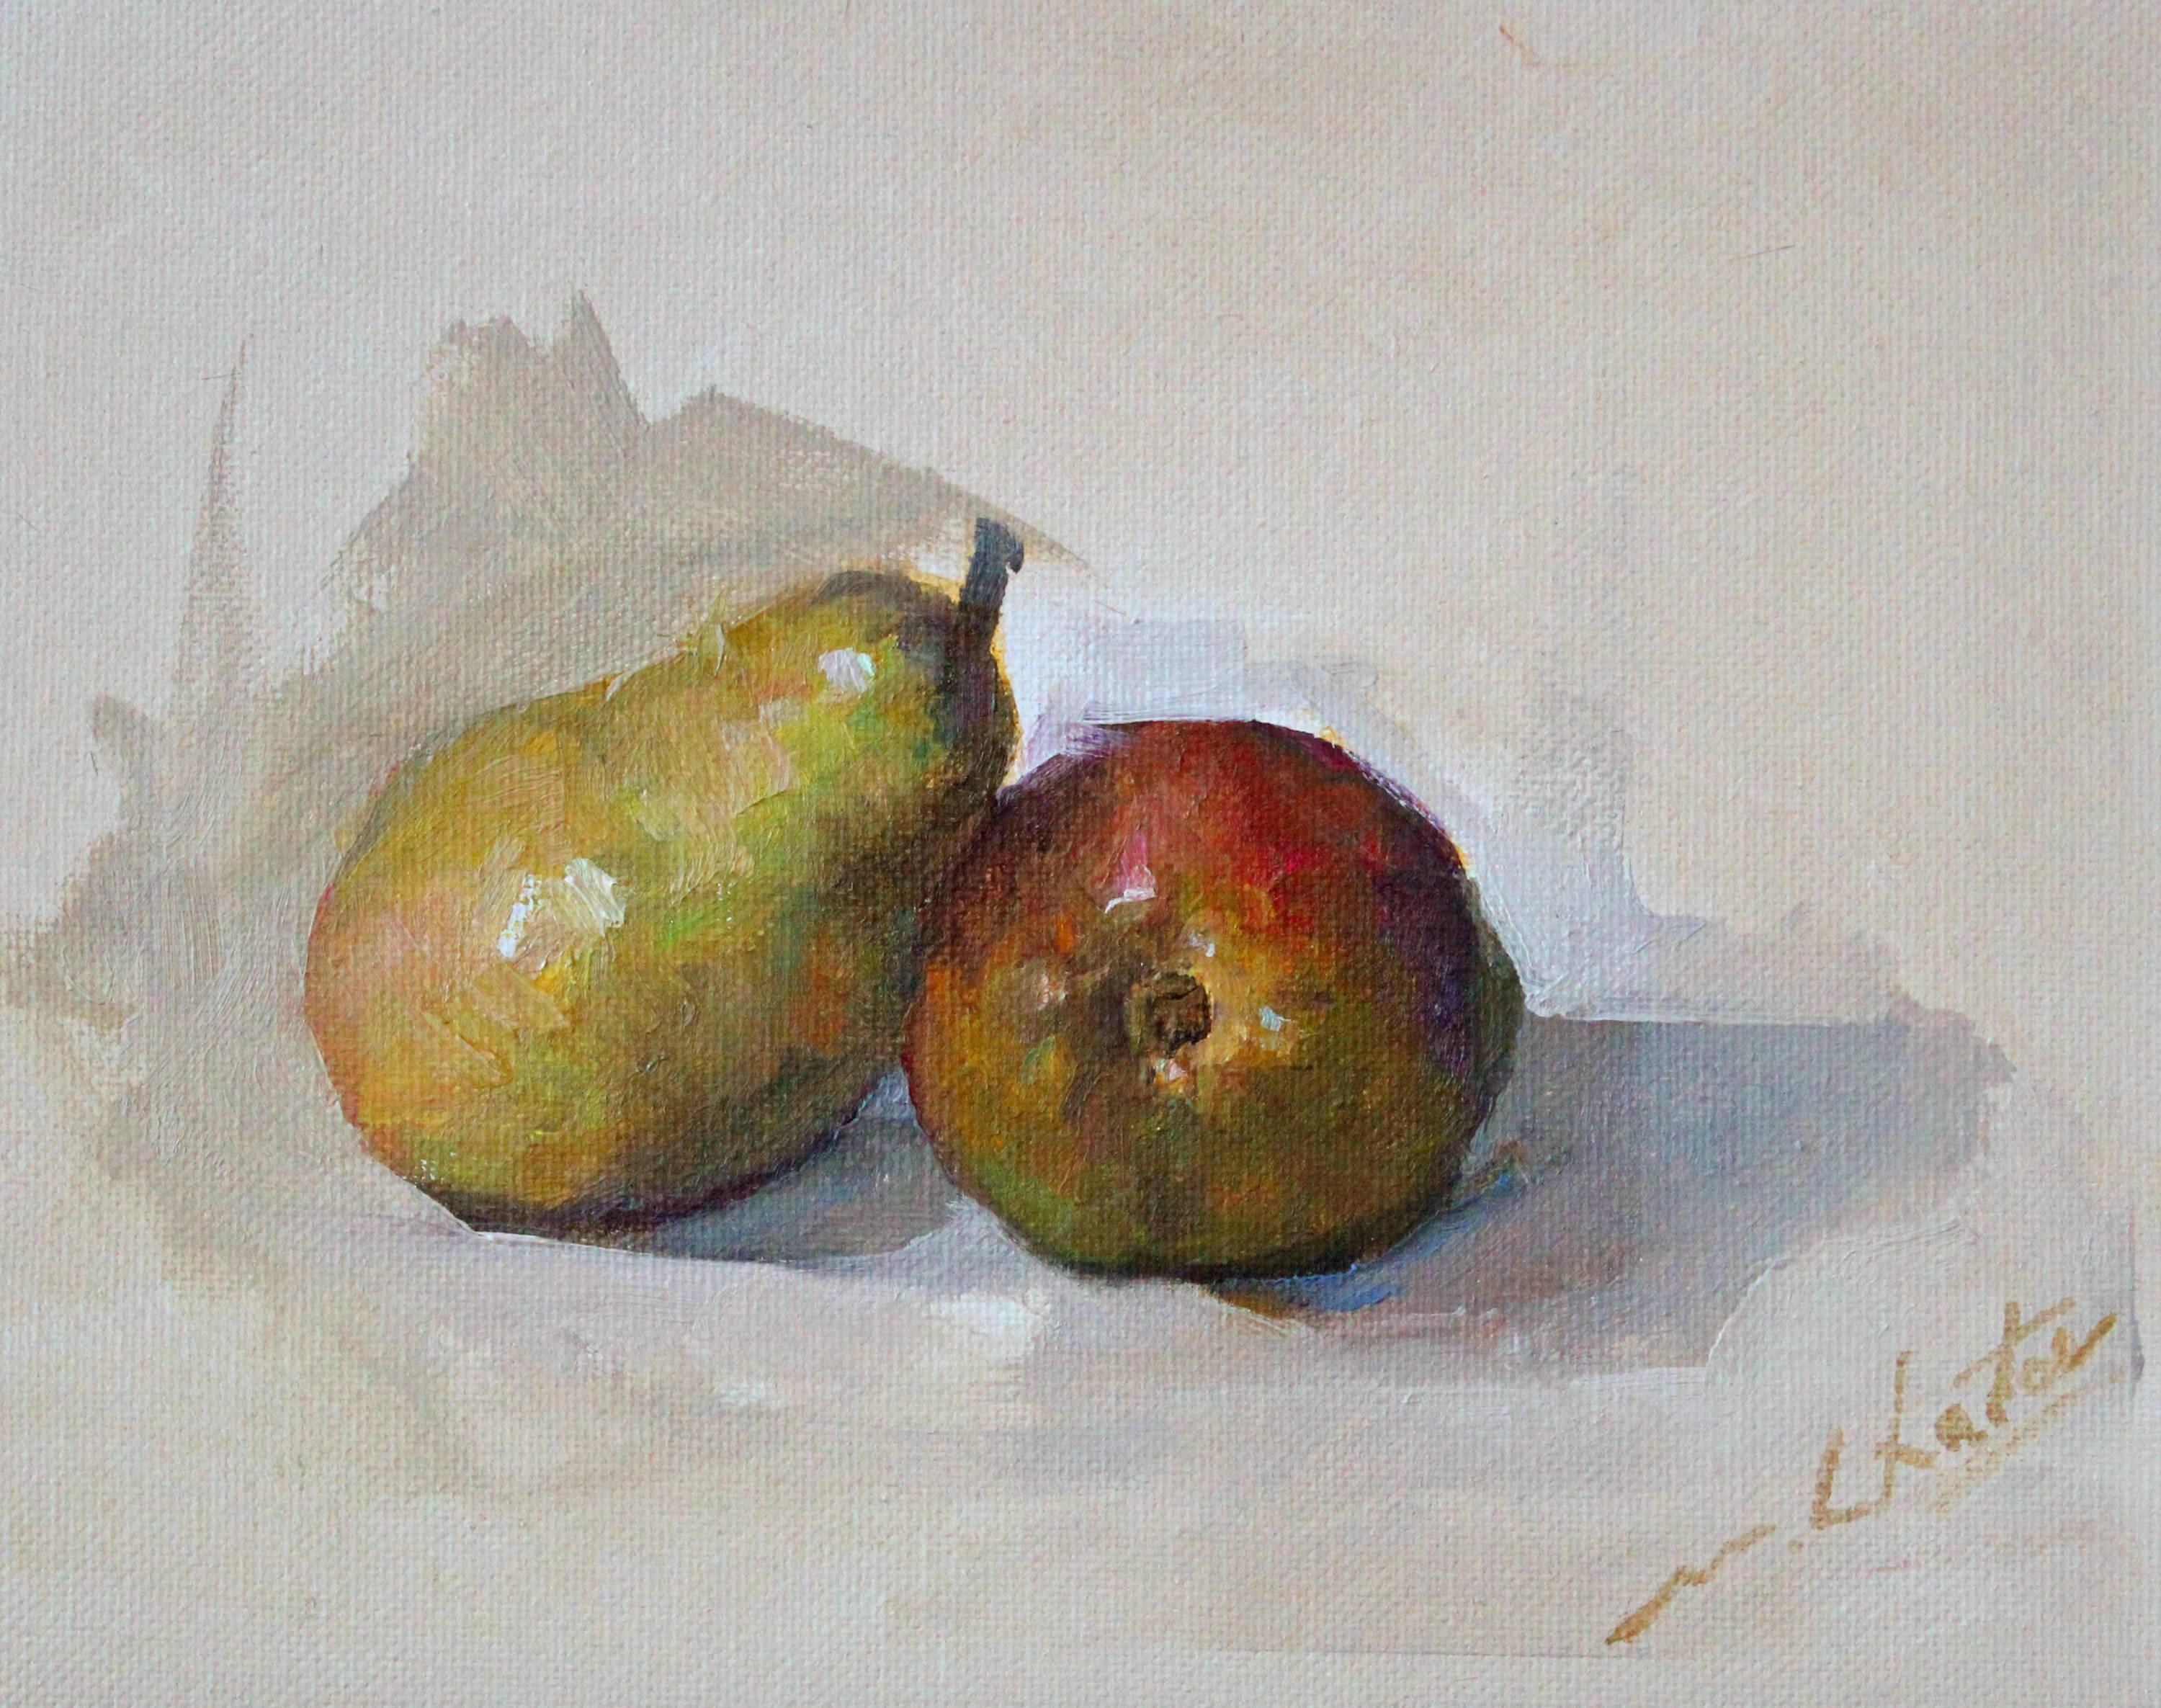 Group of Pears - American Realist Painting by Marc Chatov